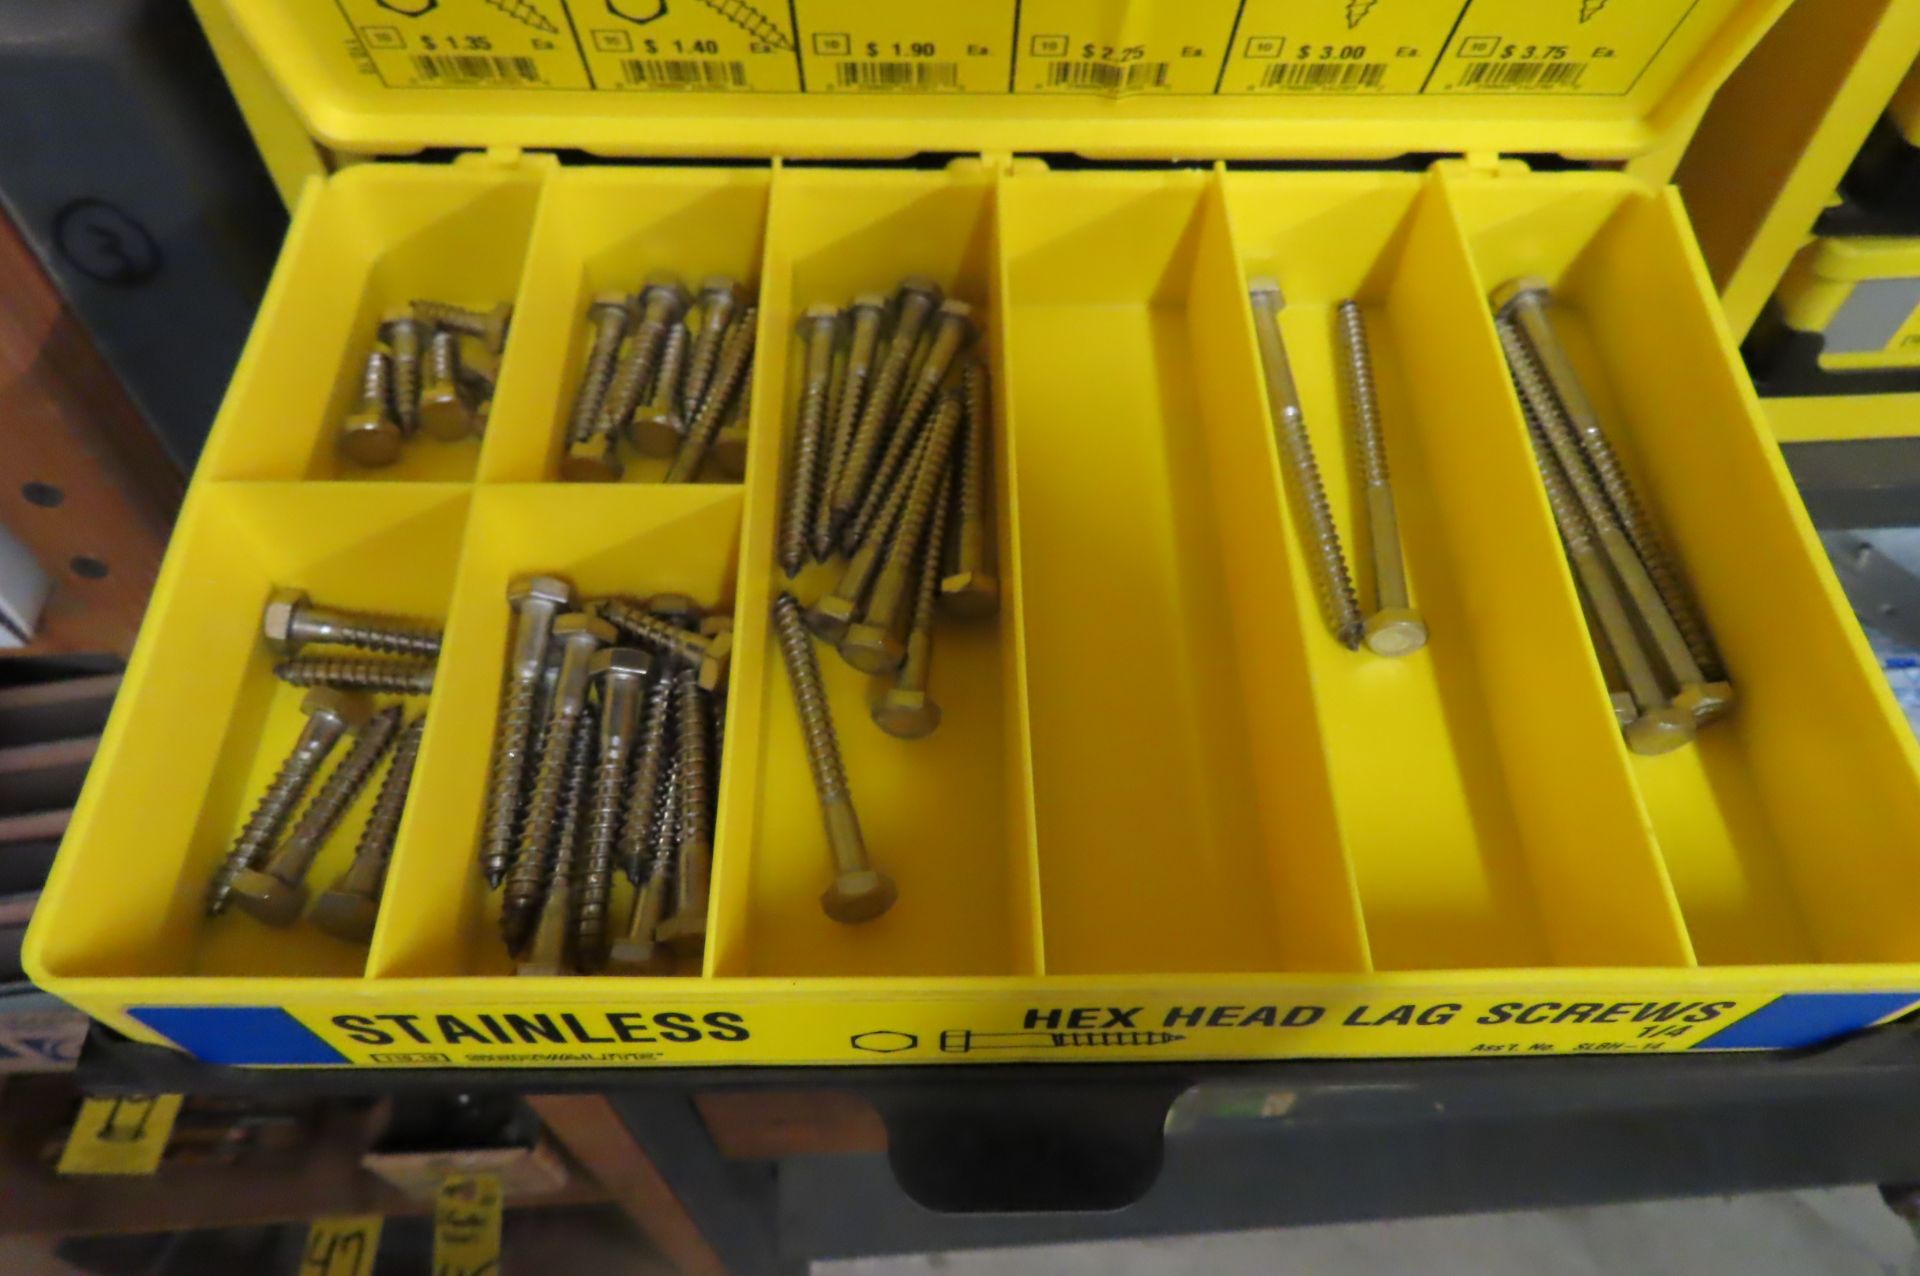 (3) SERVALITE STAINLESS STEEL AND ZINC SCREW DRAWER SETS WITH SCREWS - Image 5 of 16